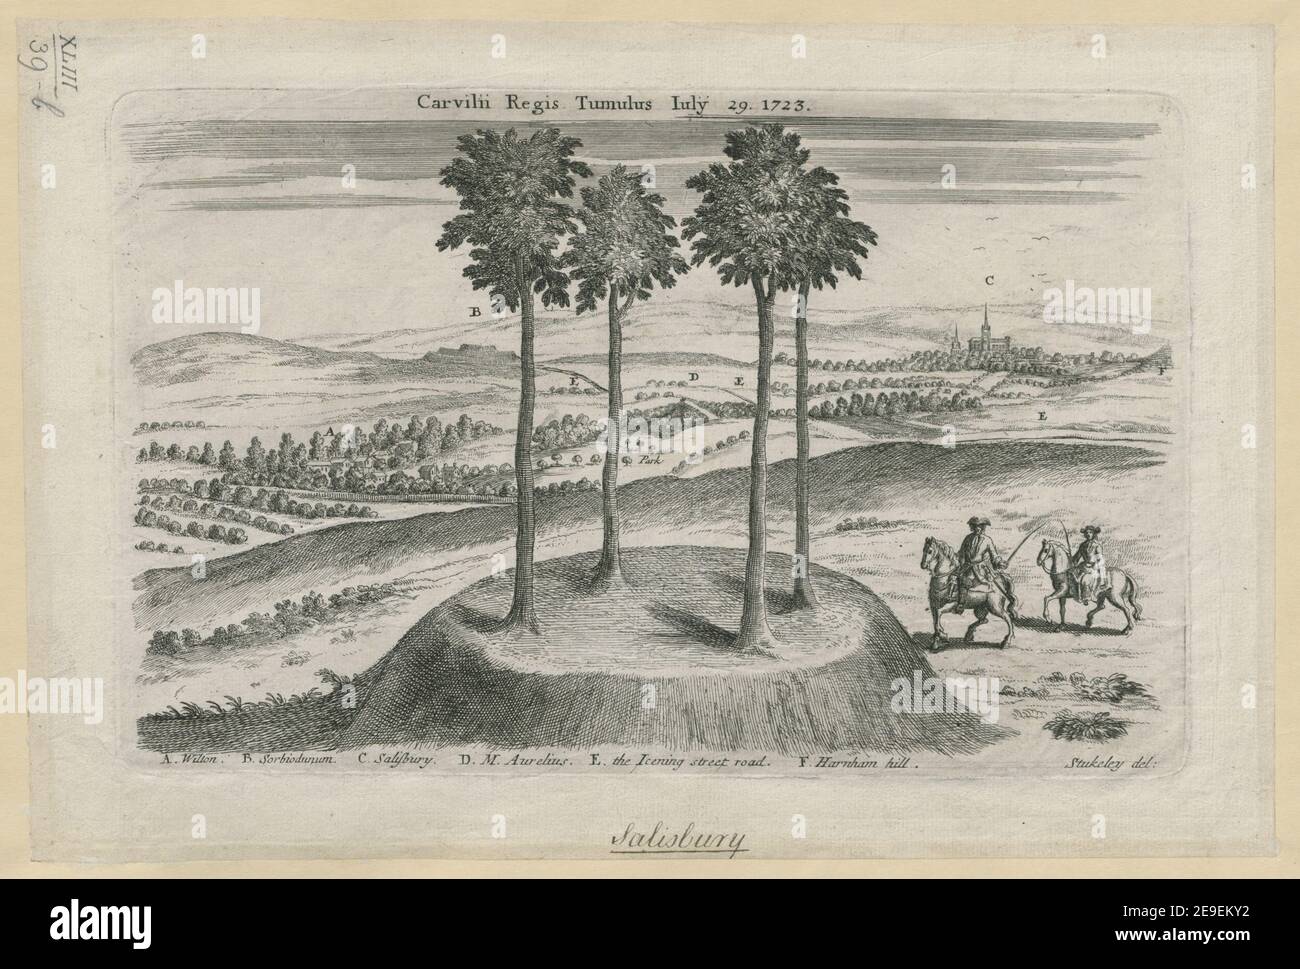 Carvili Regis Tumulus July 29 1723.  Author  Stukeley, William 43.39.b. Place of publication: [England] Publisher: [printed for the author] Date of publication: [1724]  Item type: 1 print Medium: etching Dimensions: platemark 17.7 x 27.9 cm, on sheet 21.5 x 32.4 cm.  Former owner: George III, King of Great Britain, 1738-1820 Stock Photo